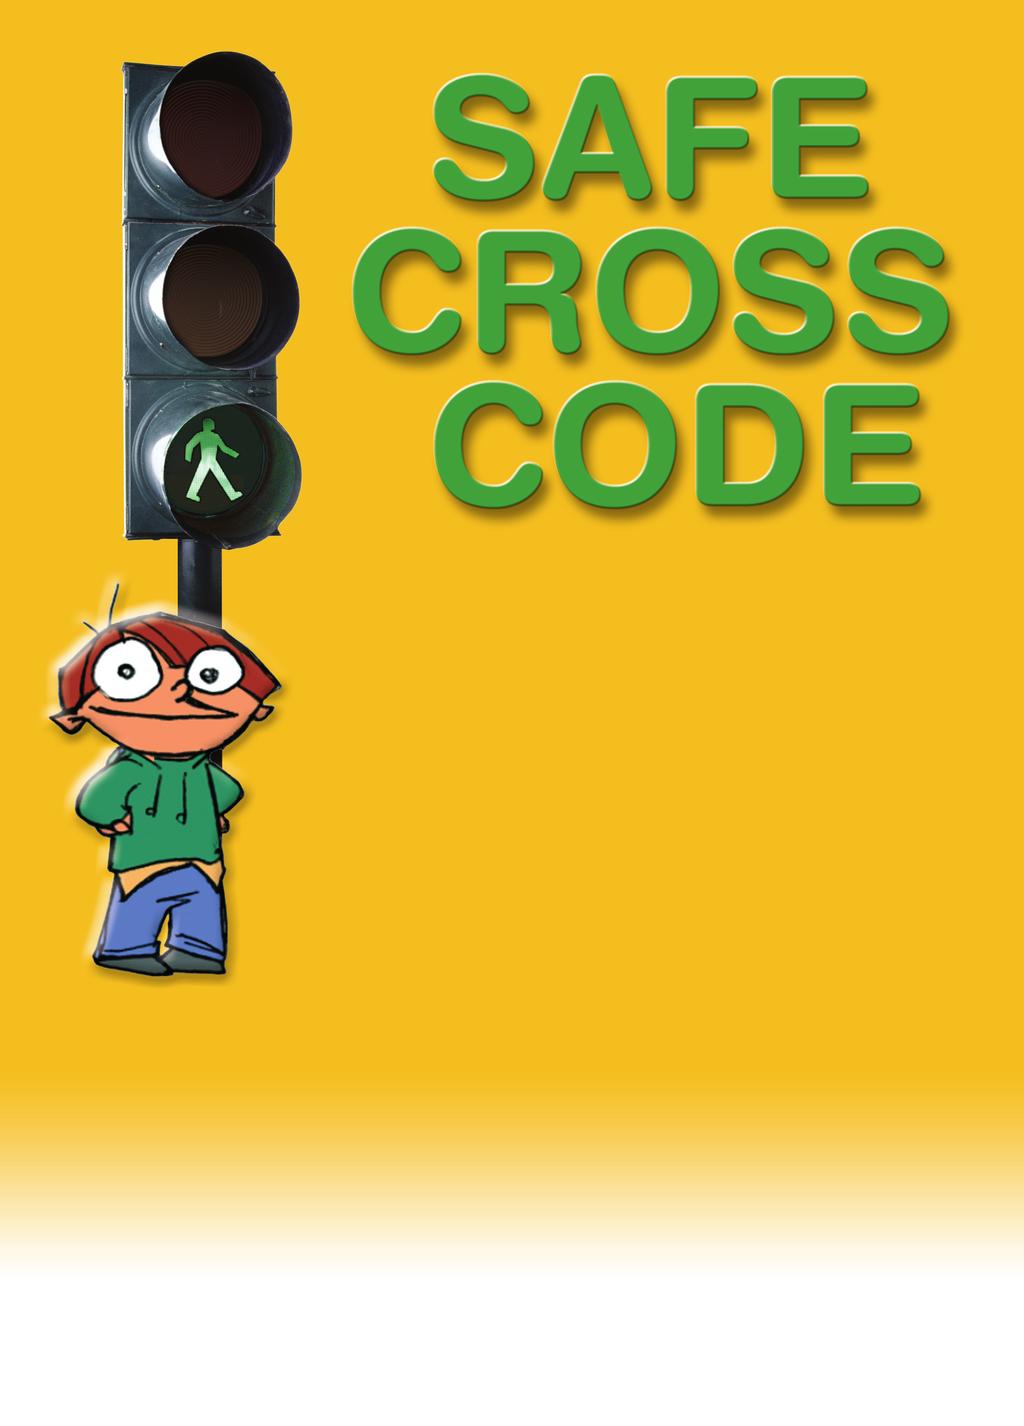 Hi, I m Mark and when I cross the road, I remember the Safe Cross Code. You should use it too! But remember- if you're under 7, you should only cross the road with an adult, like your Mum or Dad.